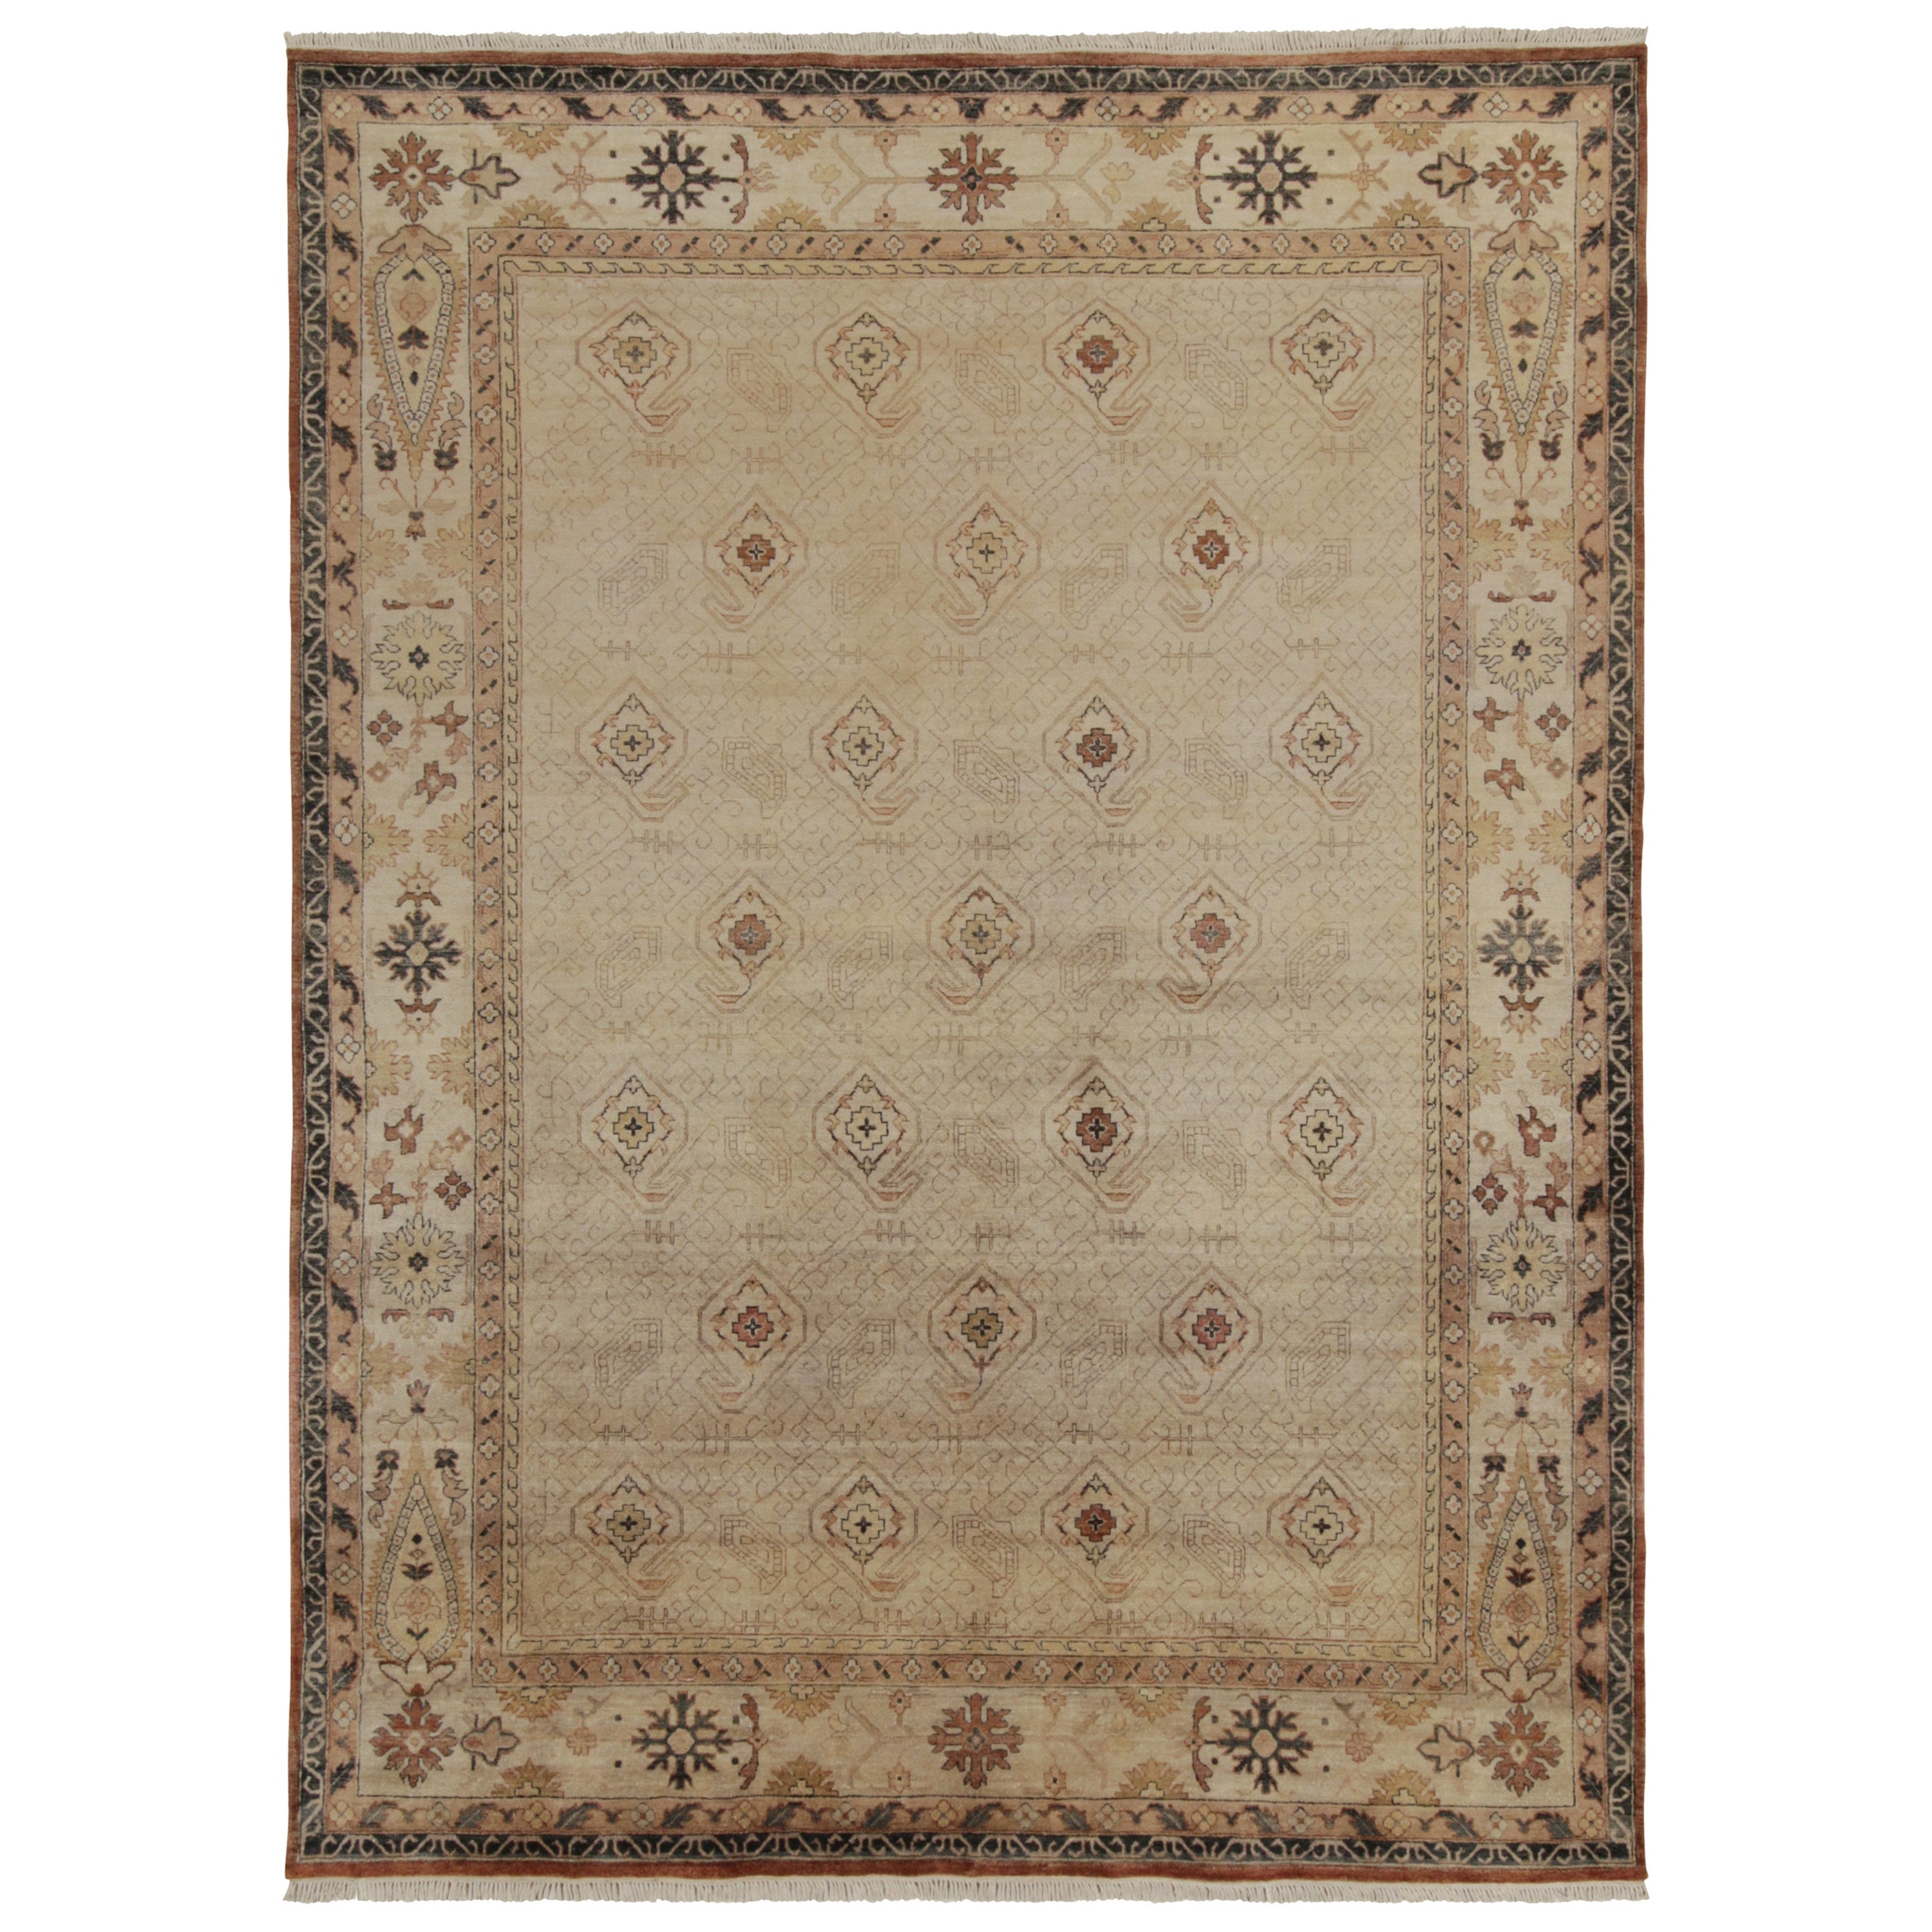 Rug & Kilim’s Classic style rug in Beige-Brown Paisleys, Rustic Florals For Sale